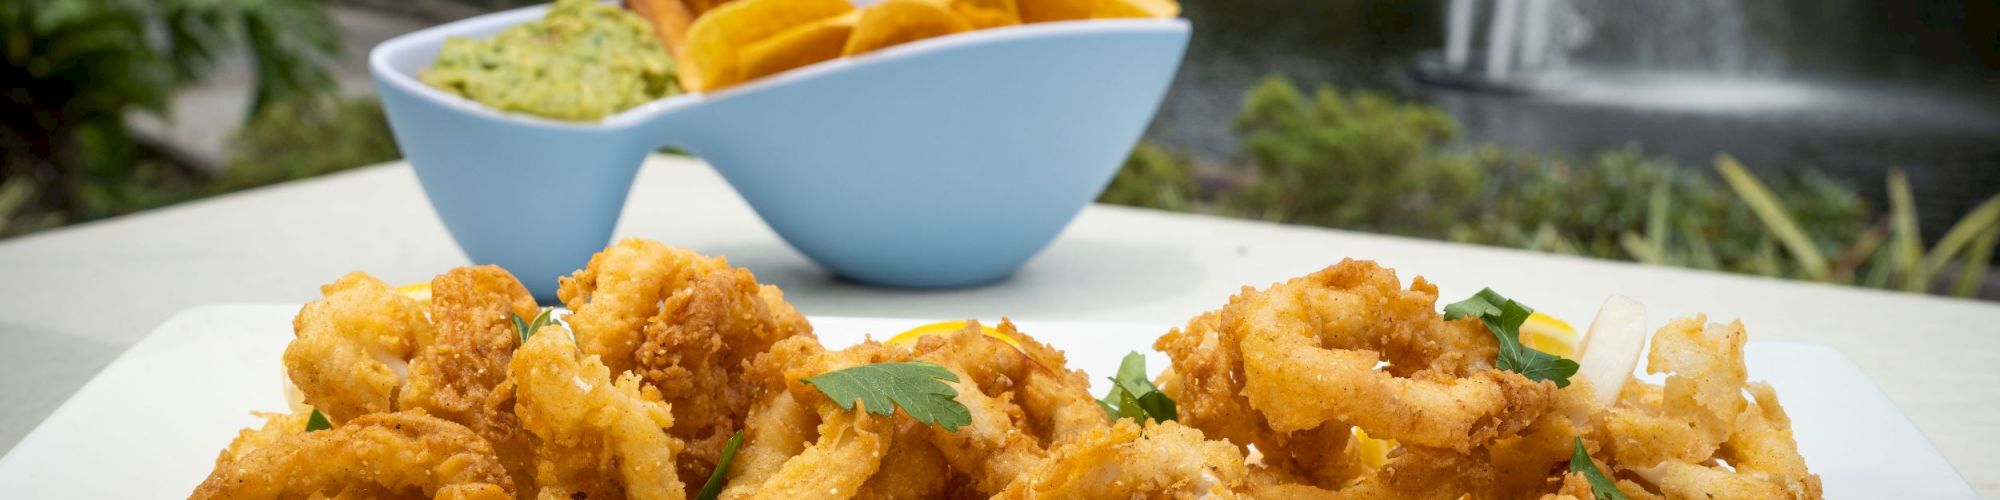 The image shows a plate of fried calamari garnished with herbs, accompanied by a bowl of chips and a green dip, near an outdoor water fountain.